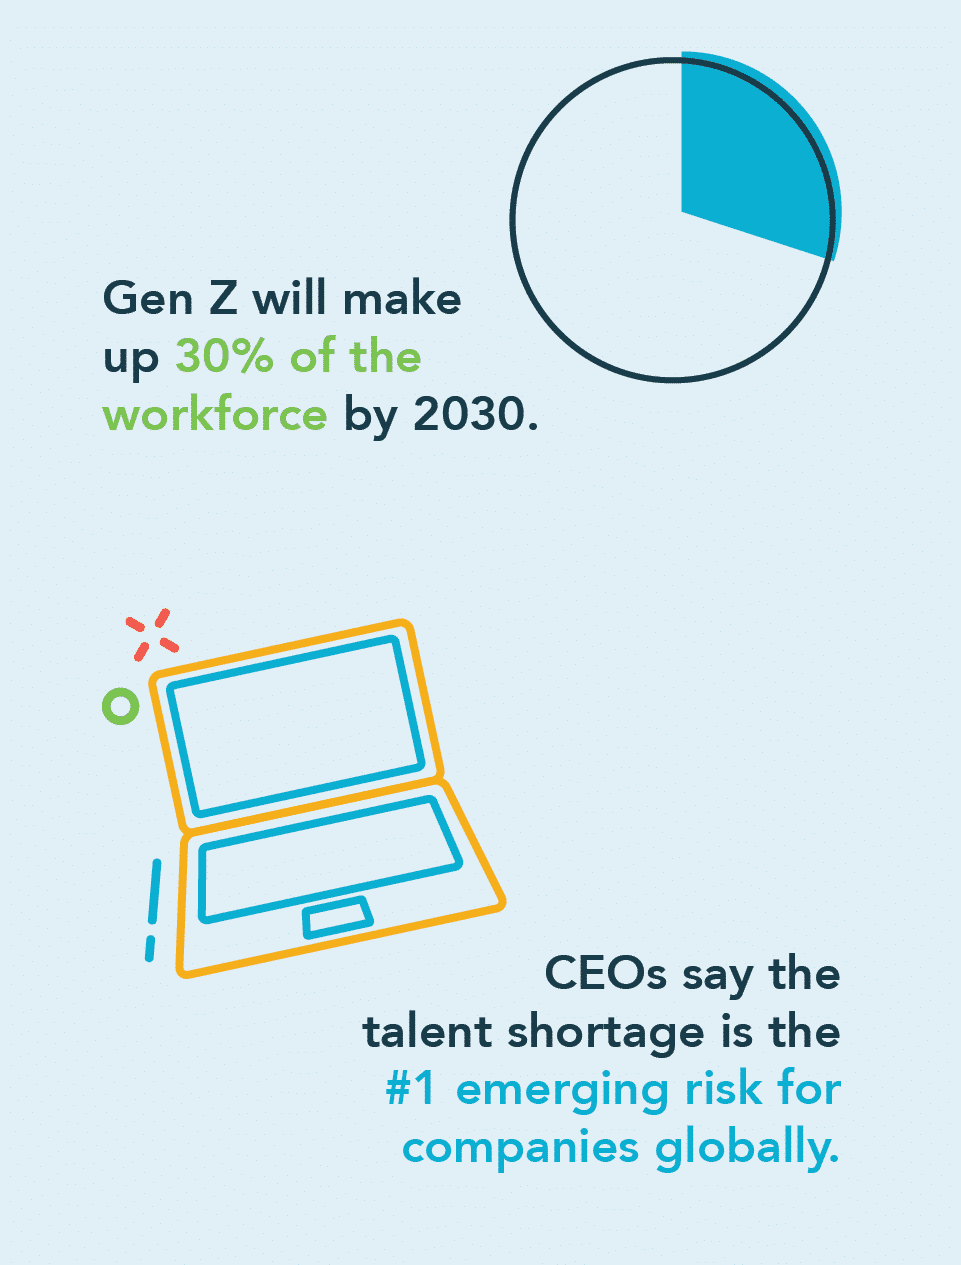 Infographic showing Gen Z will make up 30% of the workforce by 2030 and that CEOs say that talent shortage is the #1 emerging risk for companies globally